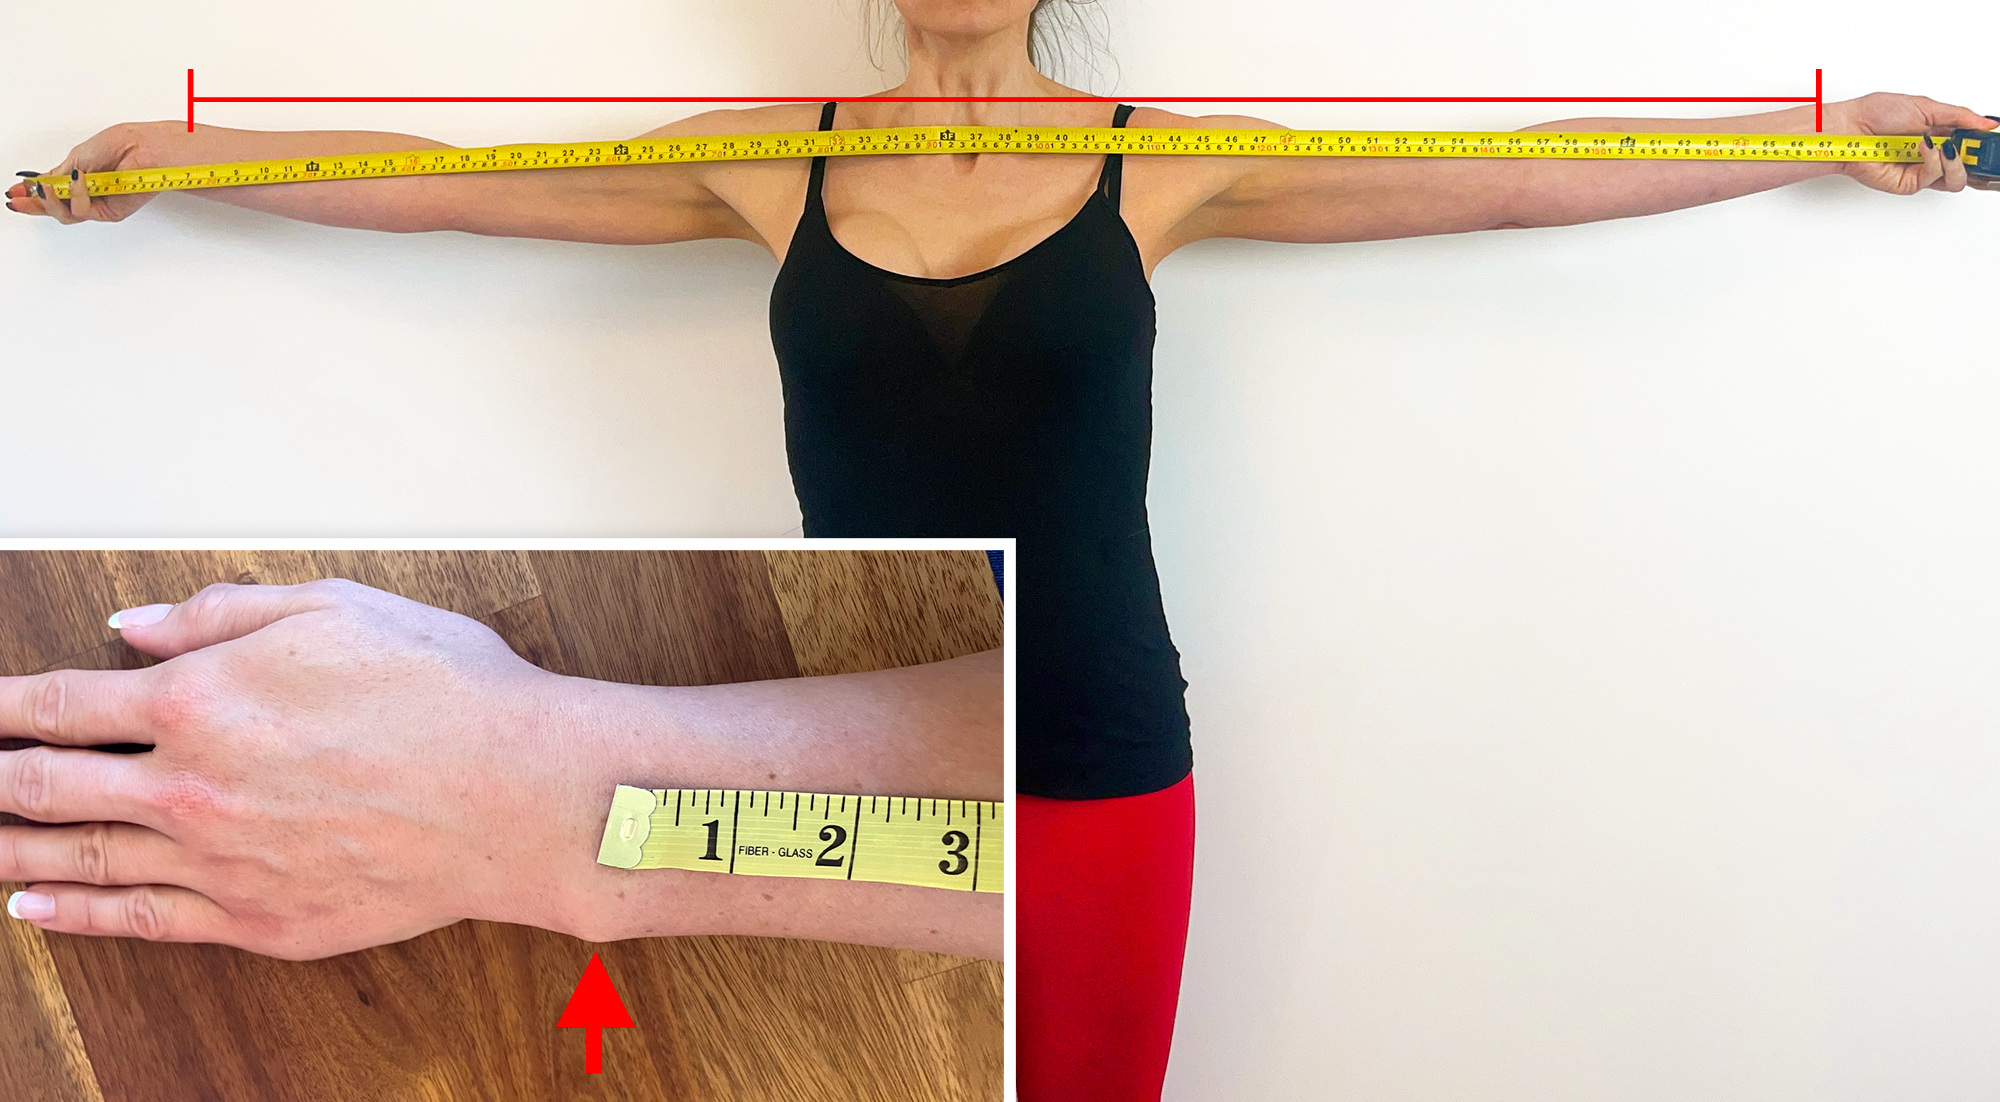 Wingspan measurement and wristbone location